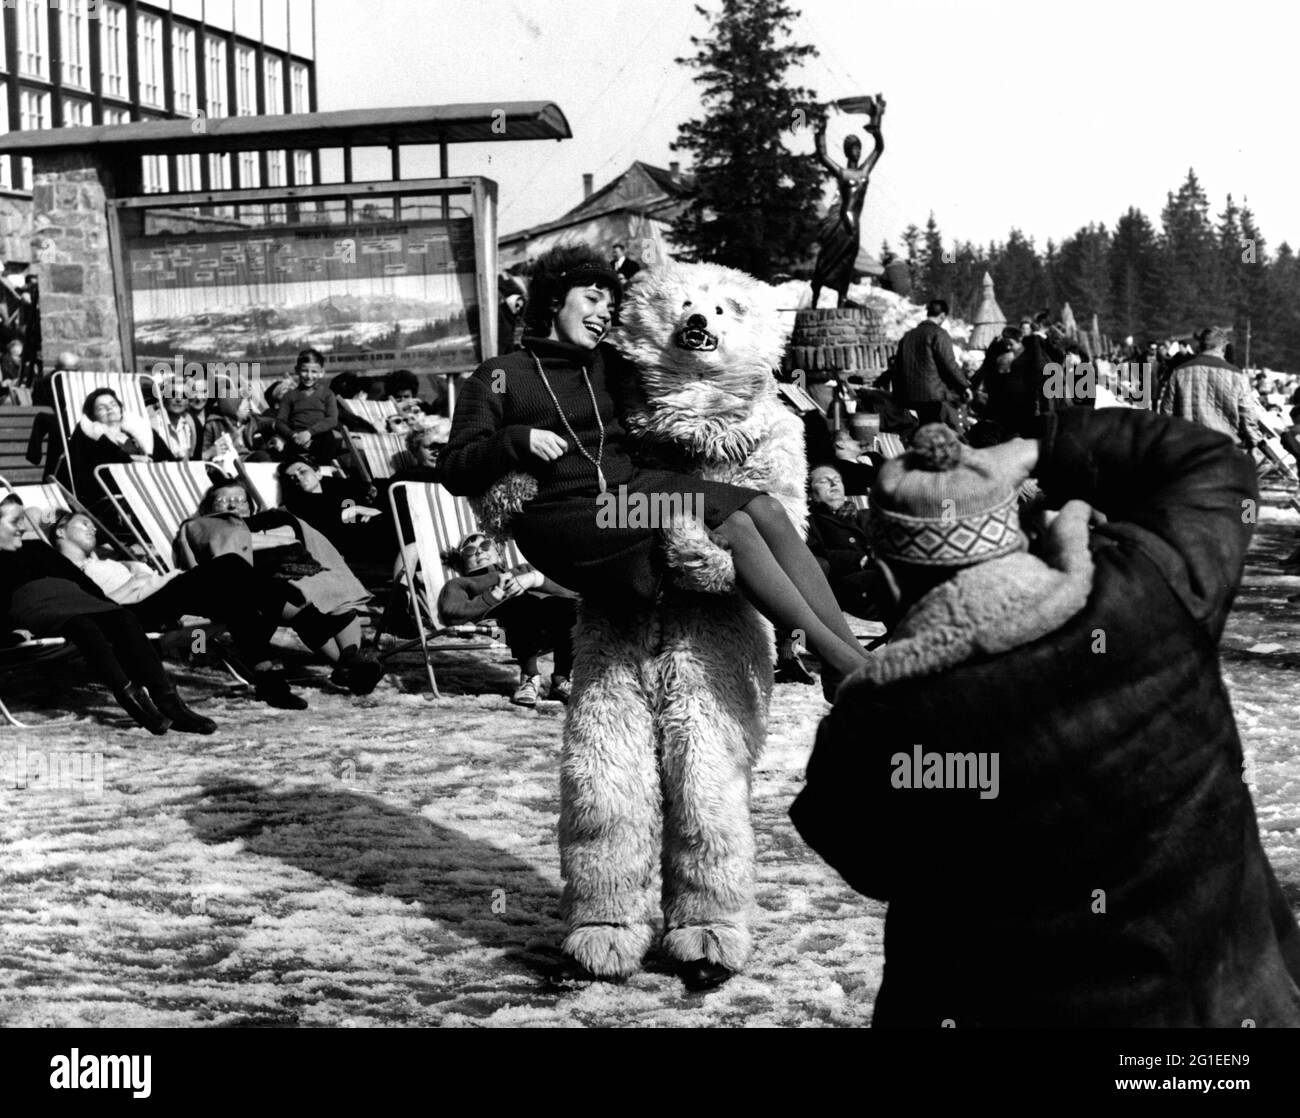 oddities, man disguised as polar bear carrying woman, man taking a photo, 1960s, ADDITIONAL-RIGHTS-CLEARANCE-INFO-NOT-AVAILABLE Stock Photo